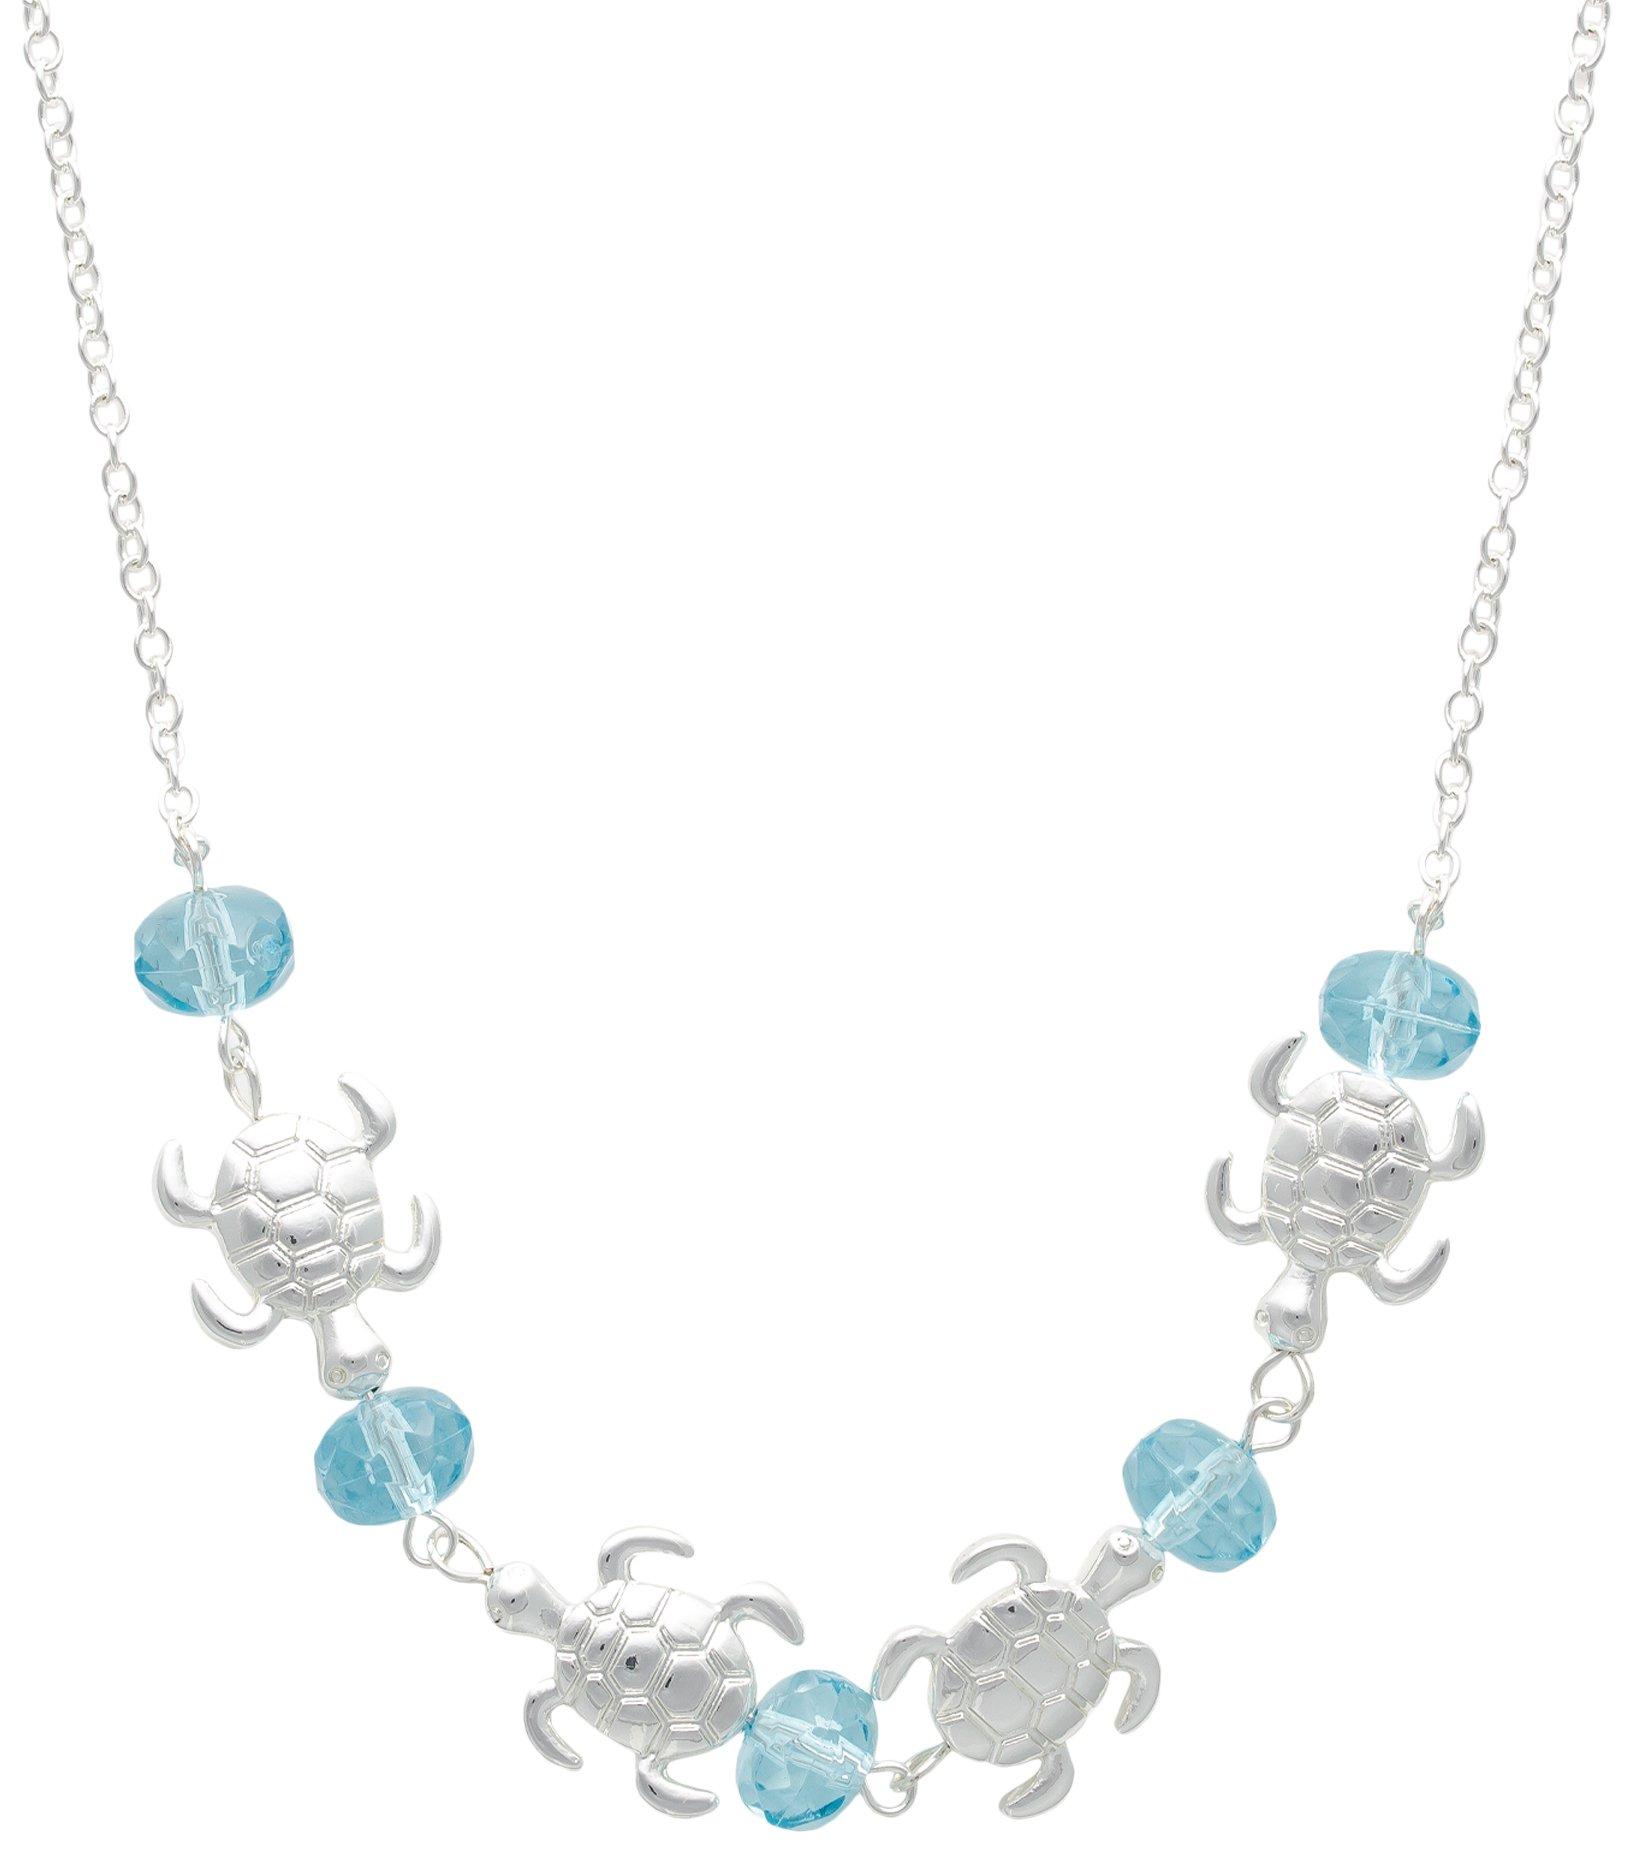 18 In. Beaded Sea Turtle Frontal Chain Necklace